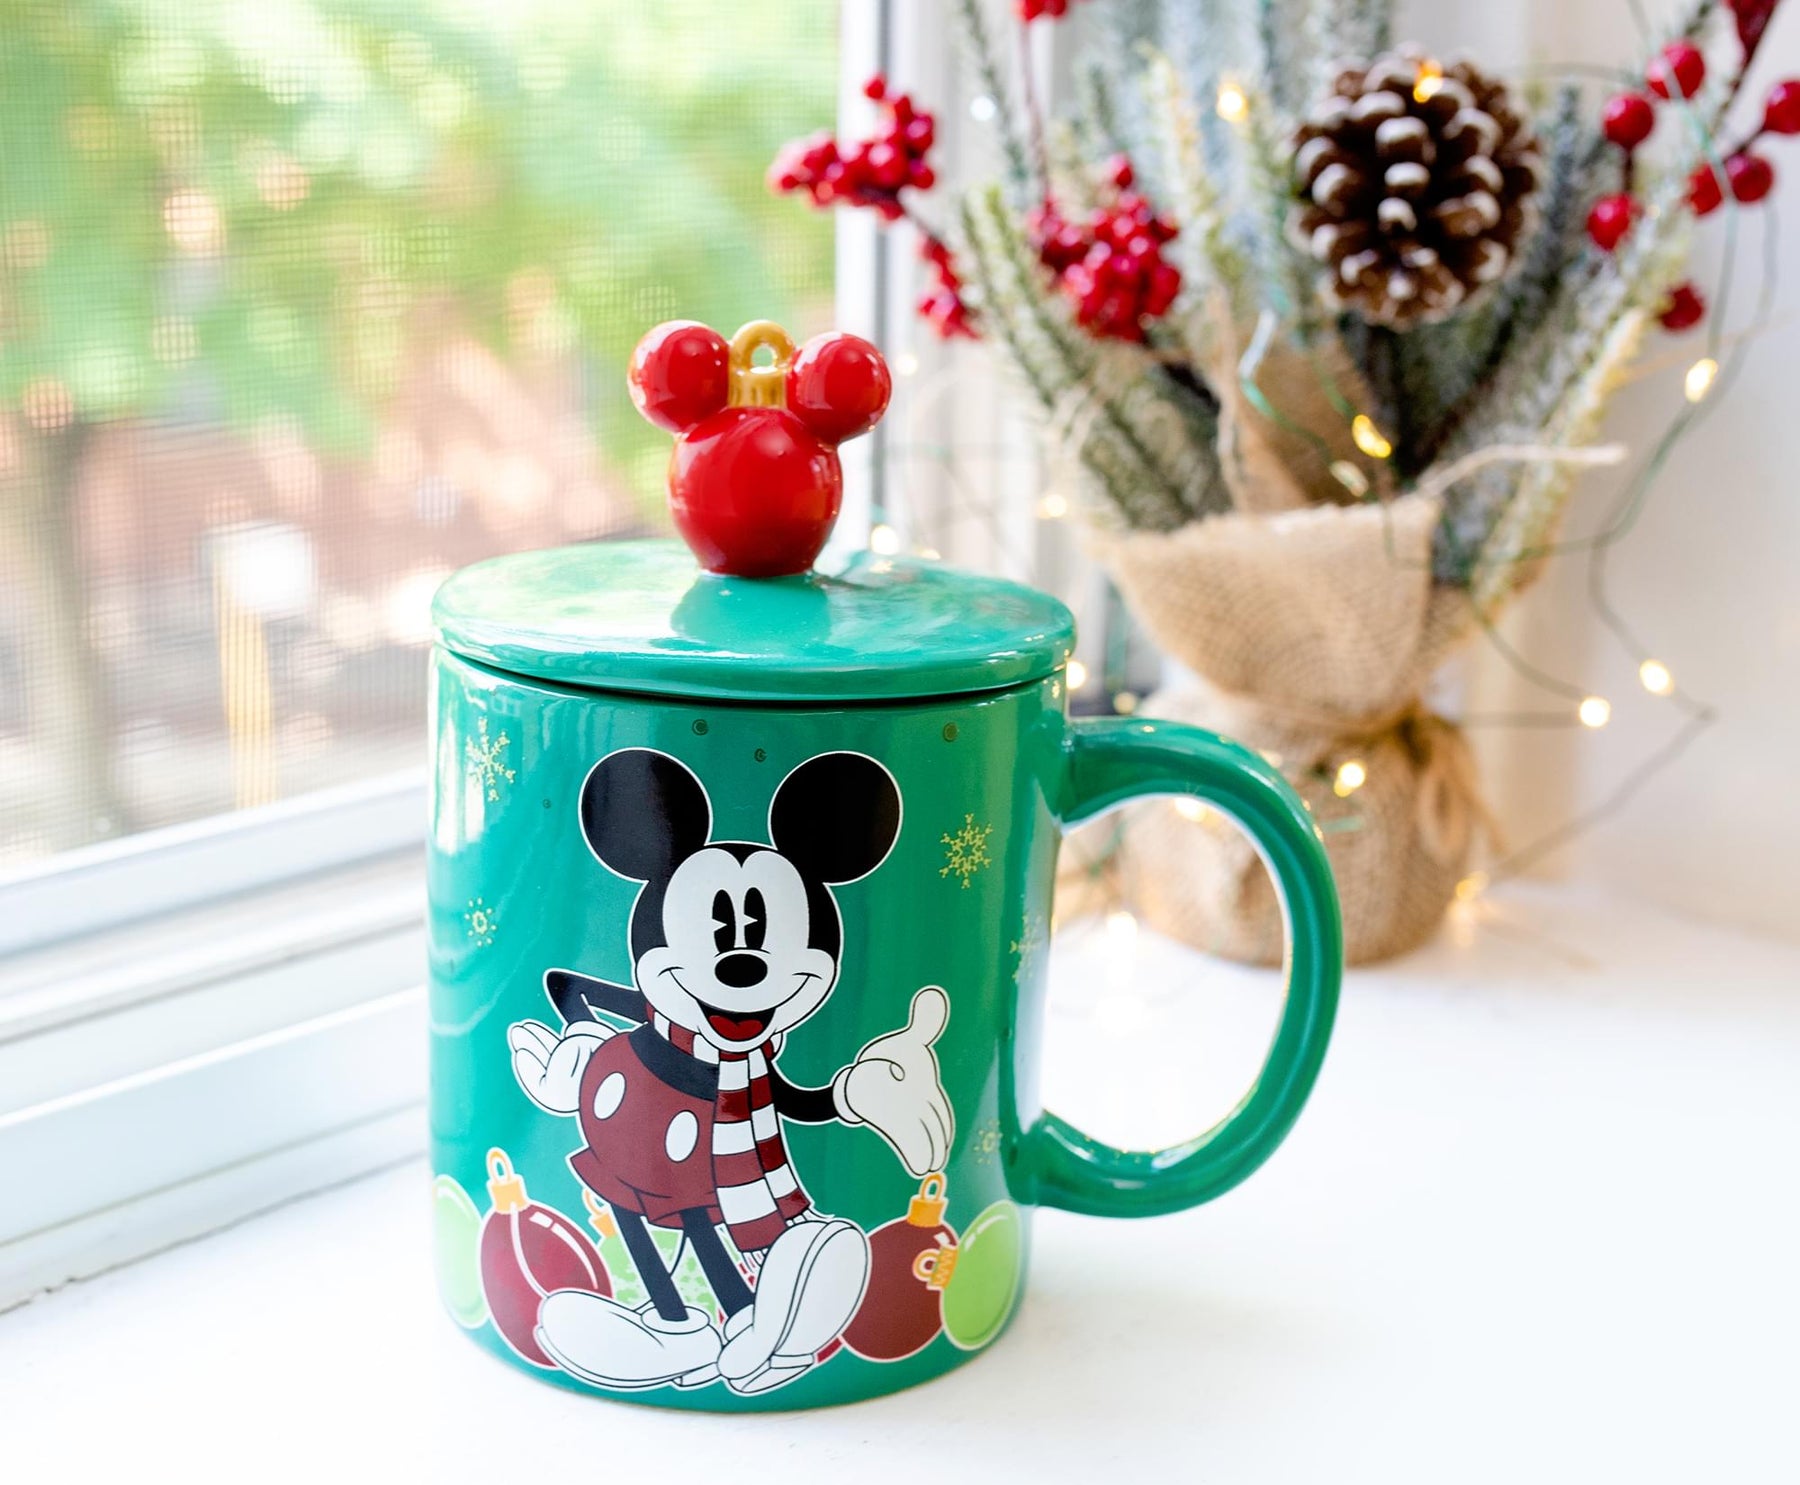 Toddler Mickey Mouse Cup 